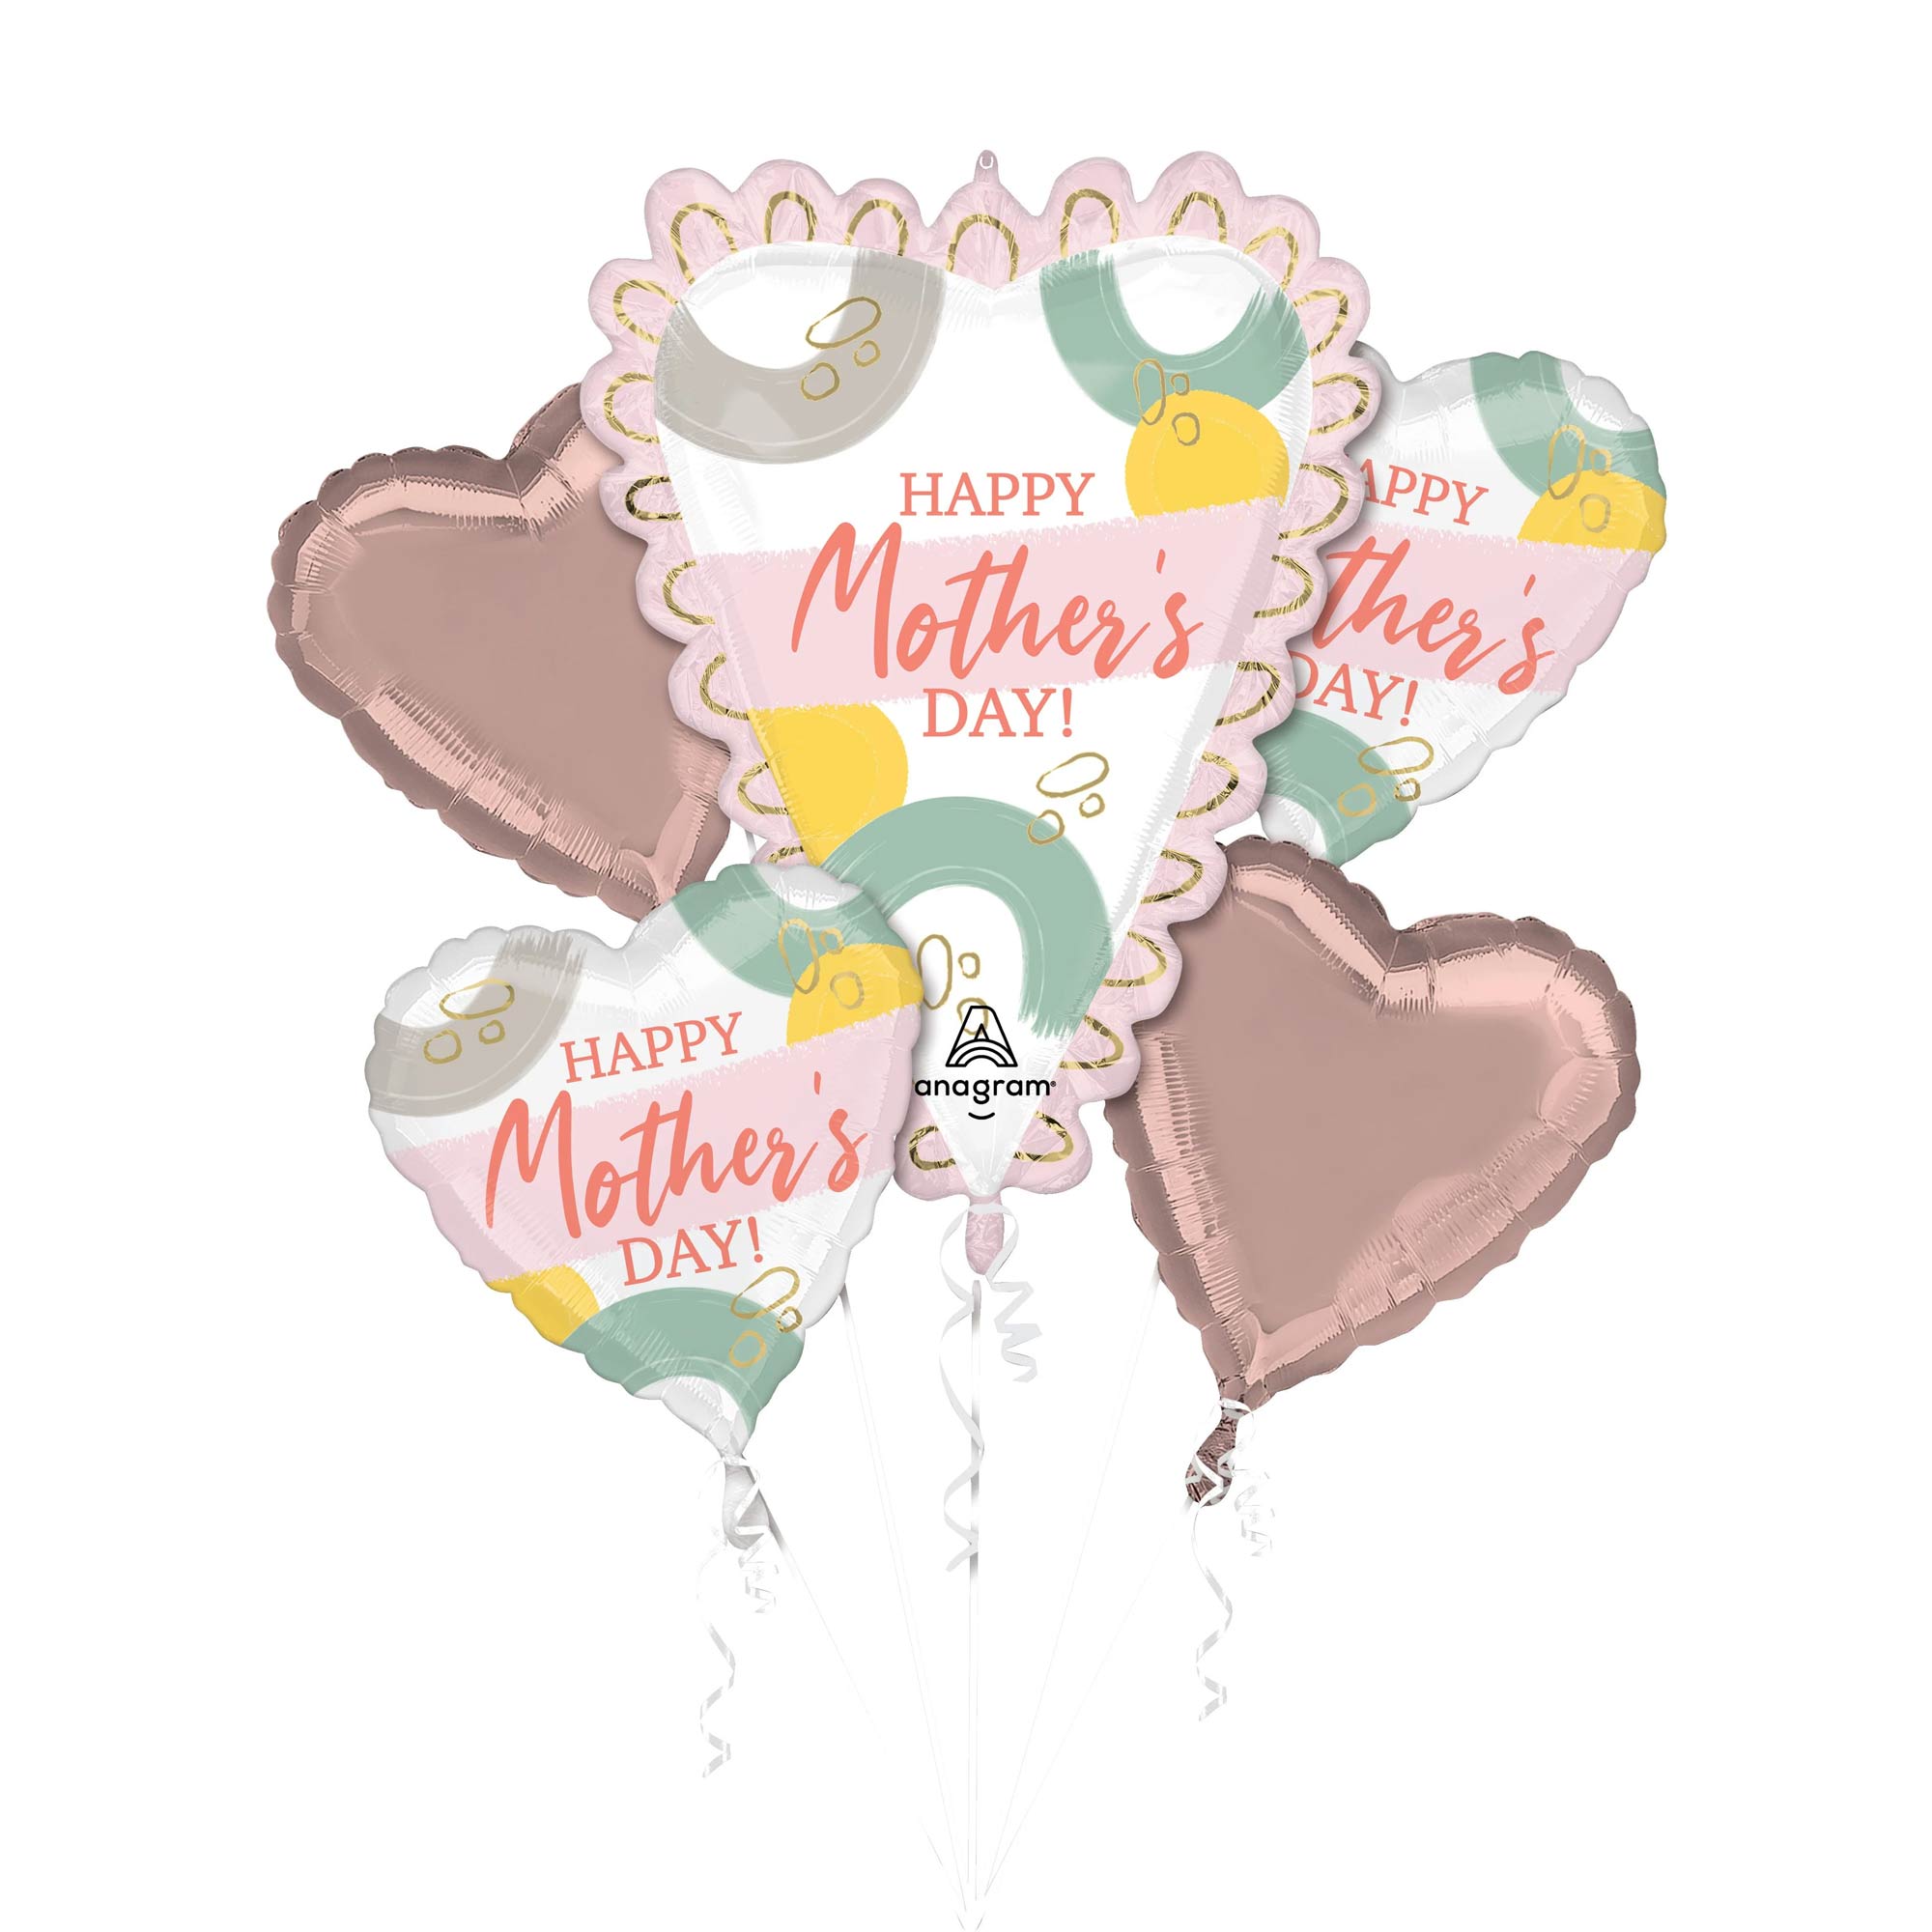 Happy Mothers Day Sketched Hearts Balloon Bouquet 5pcs